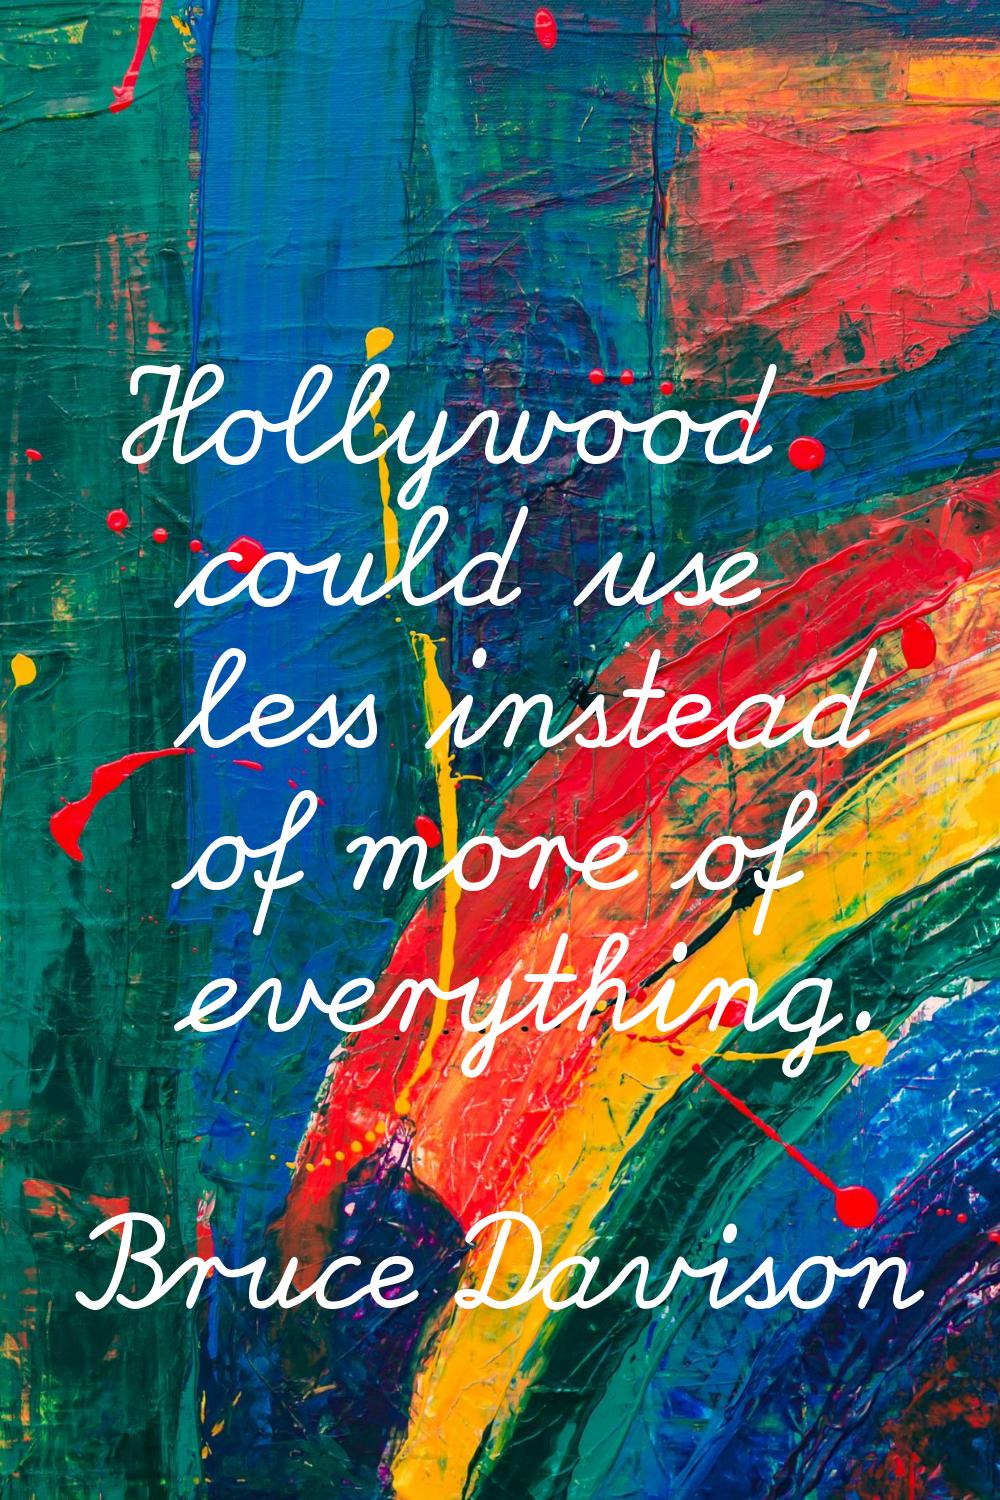 Hollywood could use less instead of more of everything.